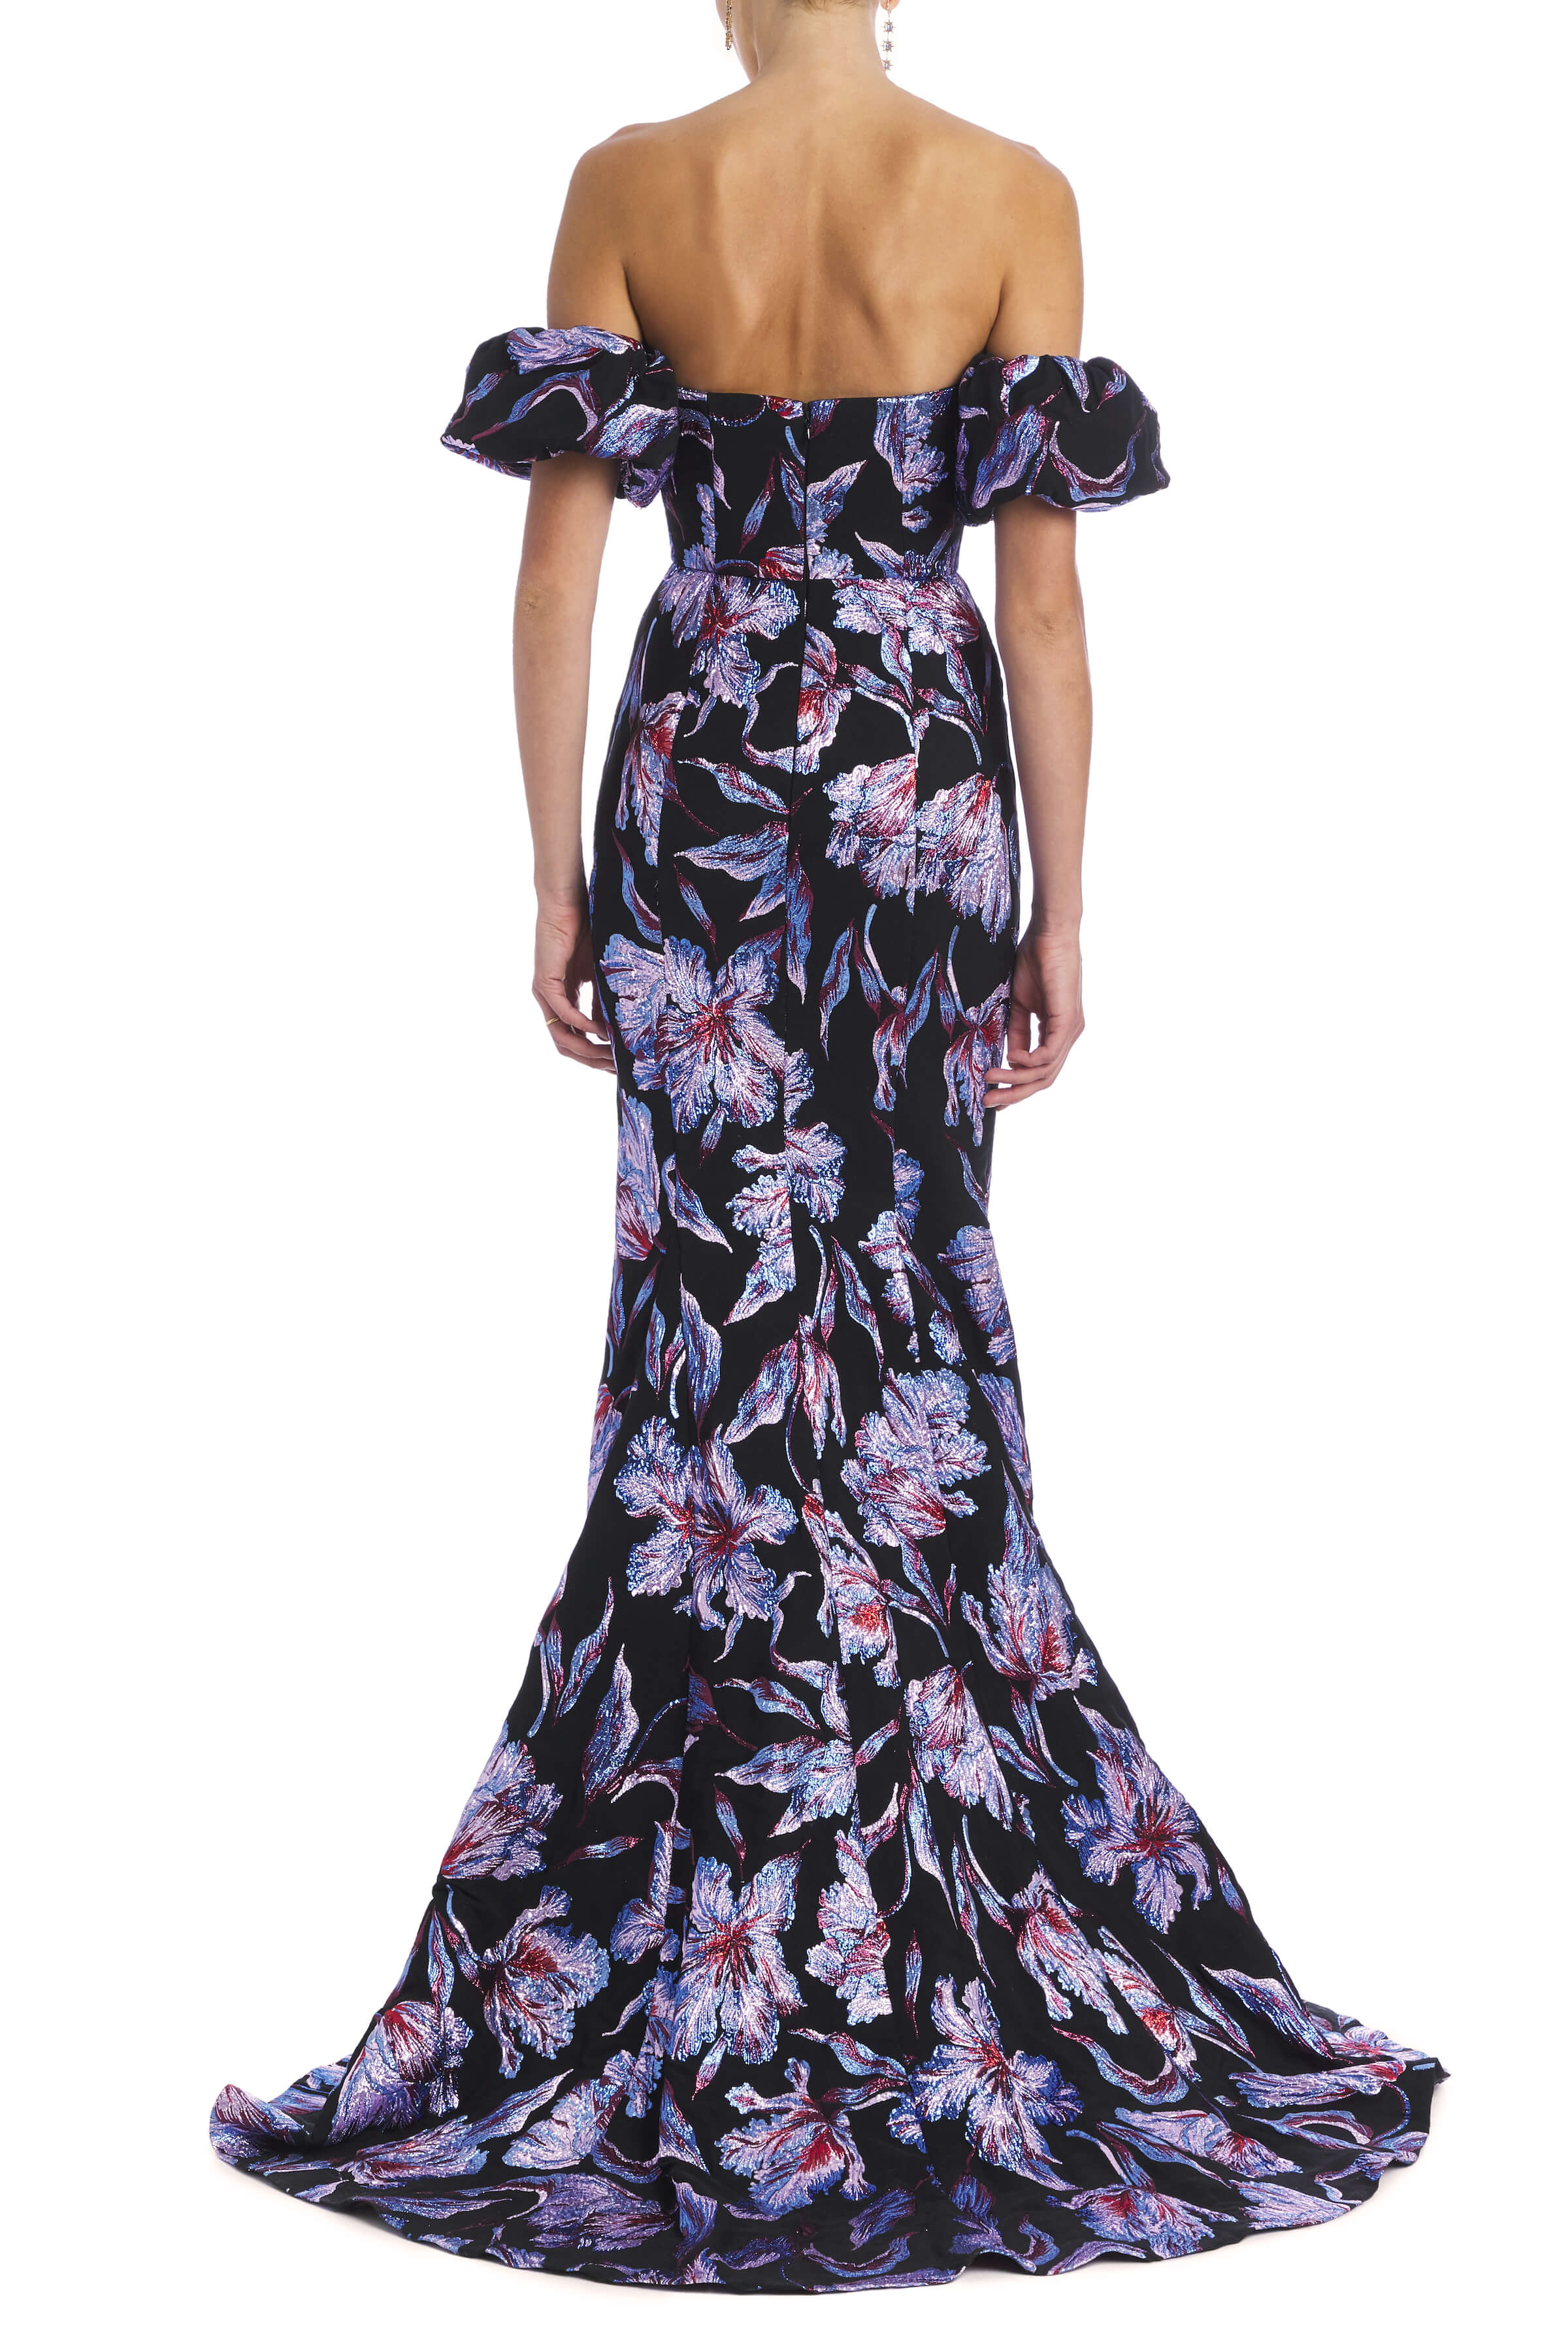 Astaire Hibiscus Metallic Brocade Strapless Sweetheart Neckline Gown With Off The Shoulder Puff Sleeves